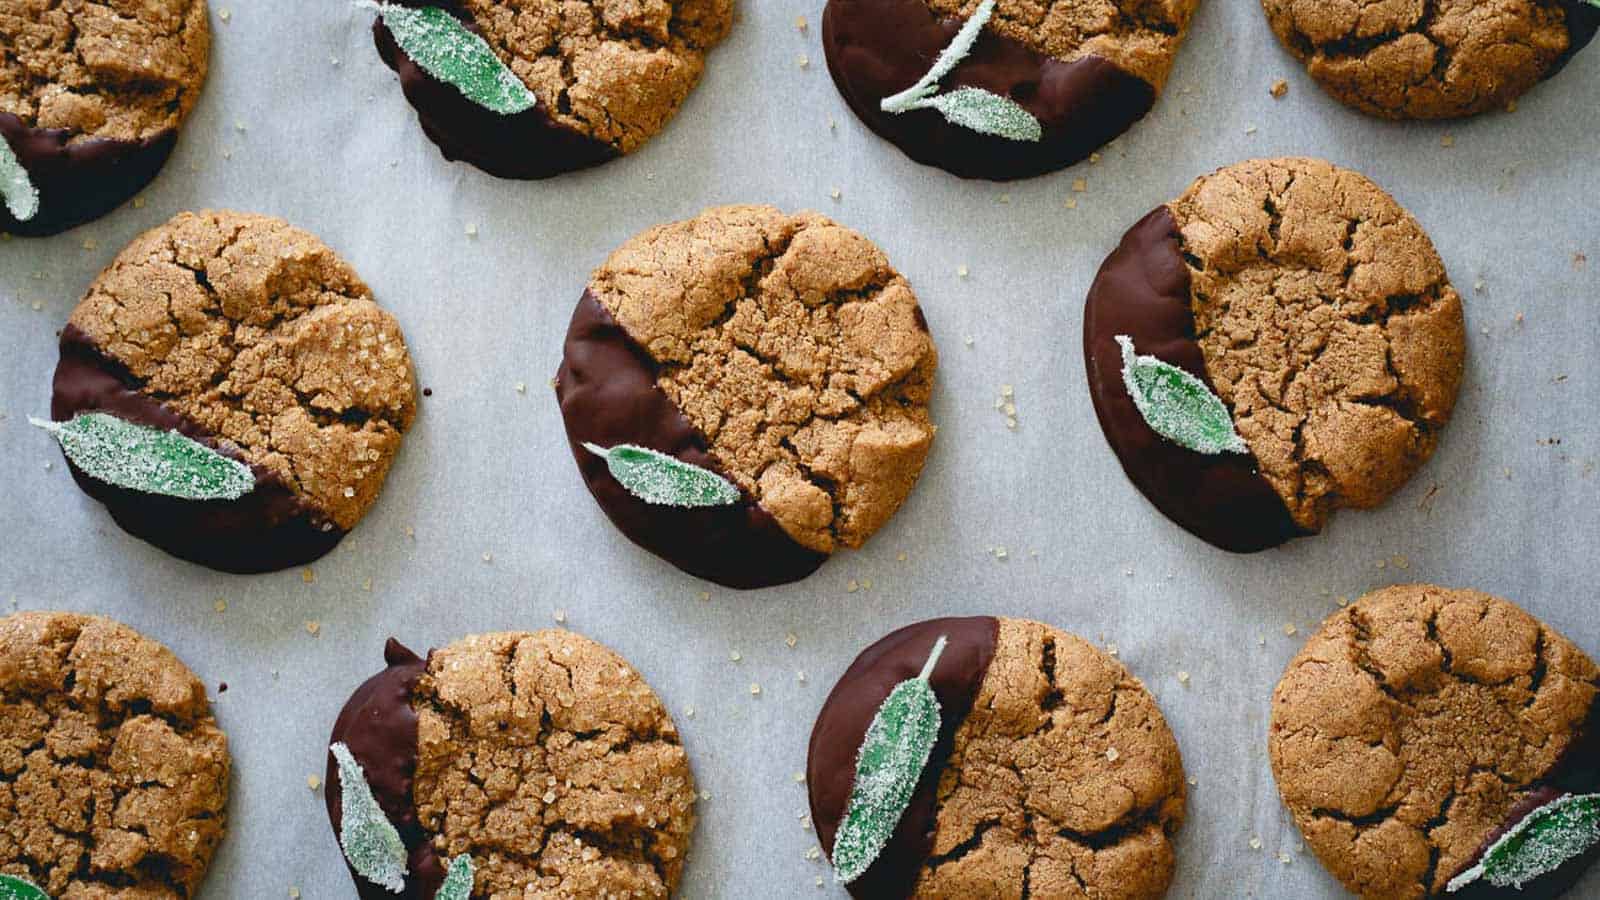 Chocolate dipped cashew almond butter cookies on parchment lined baking sheet garnished with candied sage leaf.